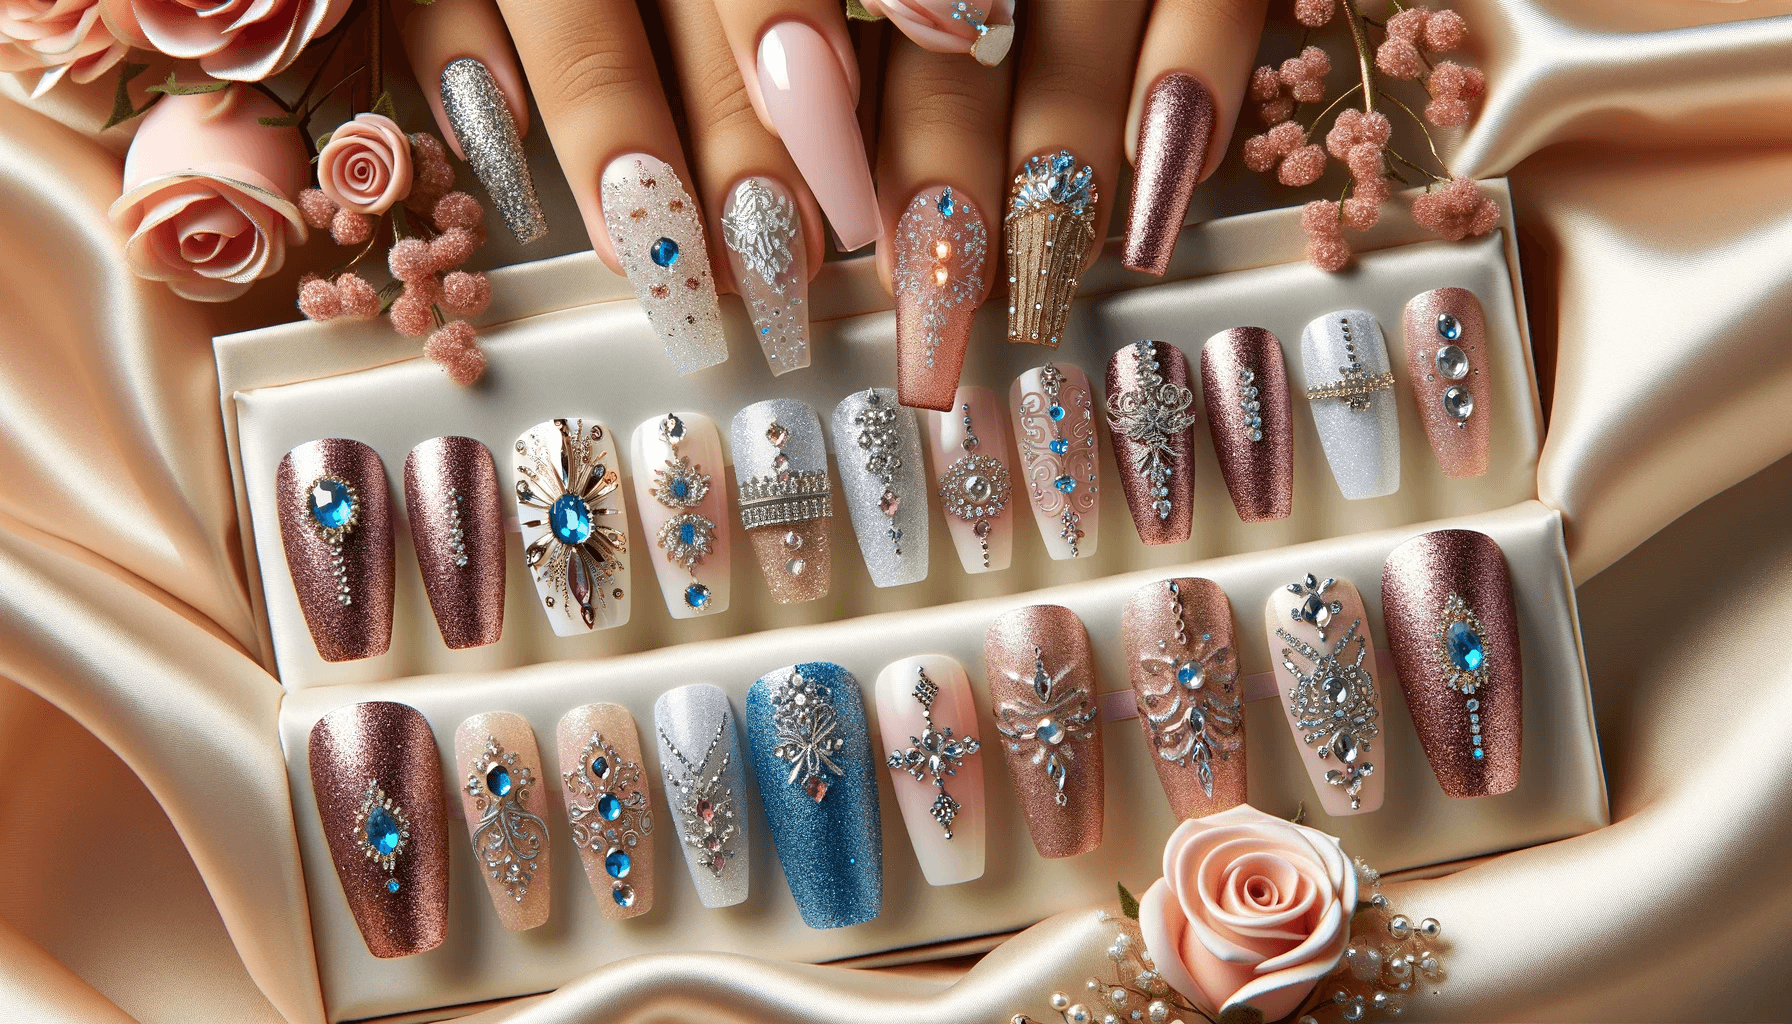 A close up of a person's beautifully manicured nails with various designs, perfect for a Quinceanera